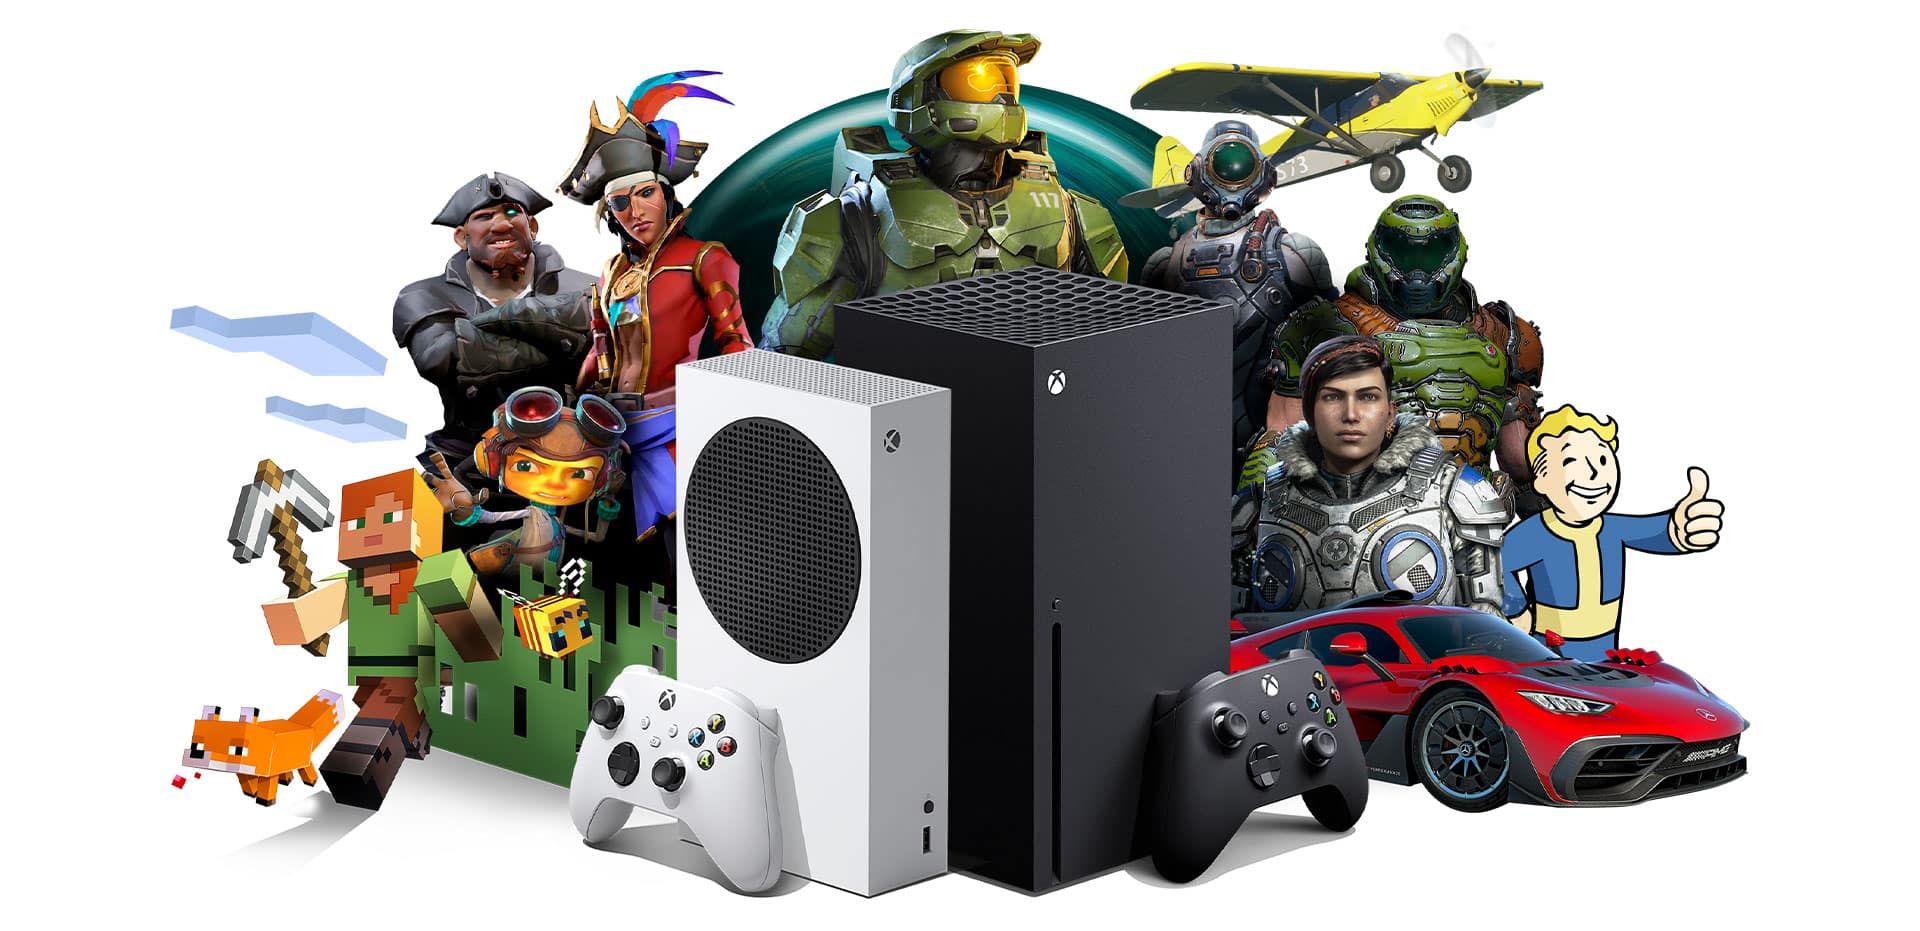 Xbox will reportedly announce another new acquisition of game